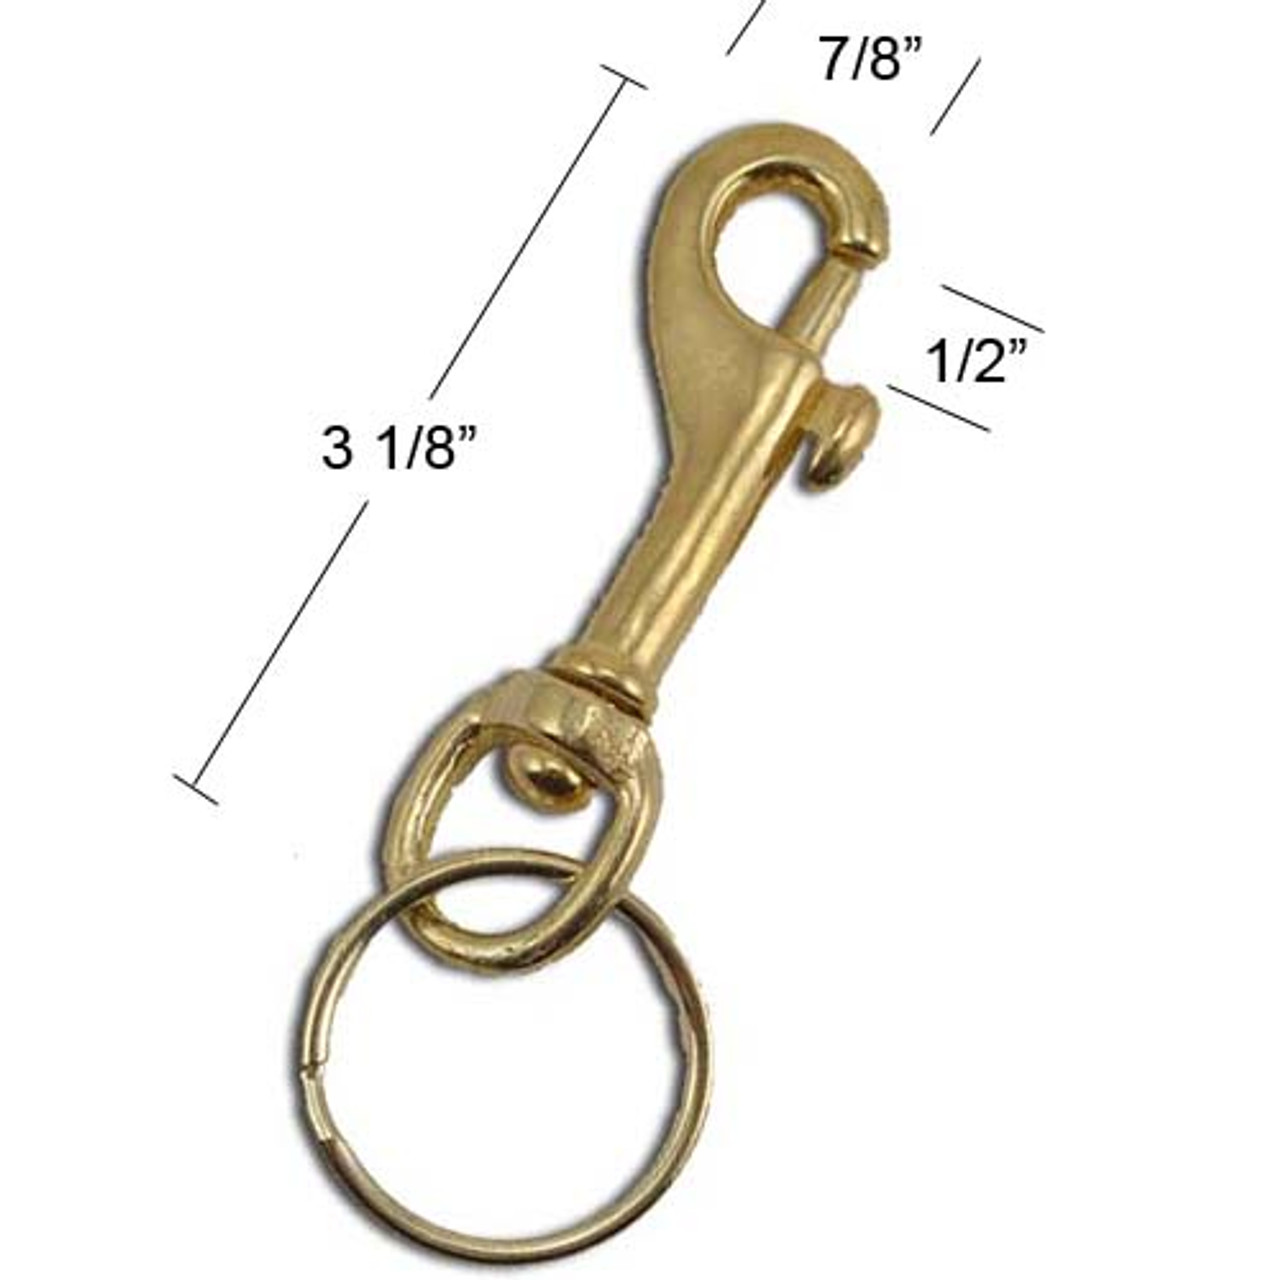 Heavy Duty Large Snap Clip Key Ring Nickel Plated